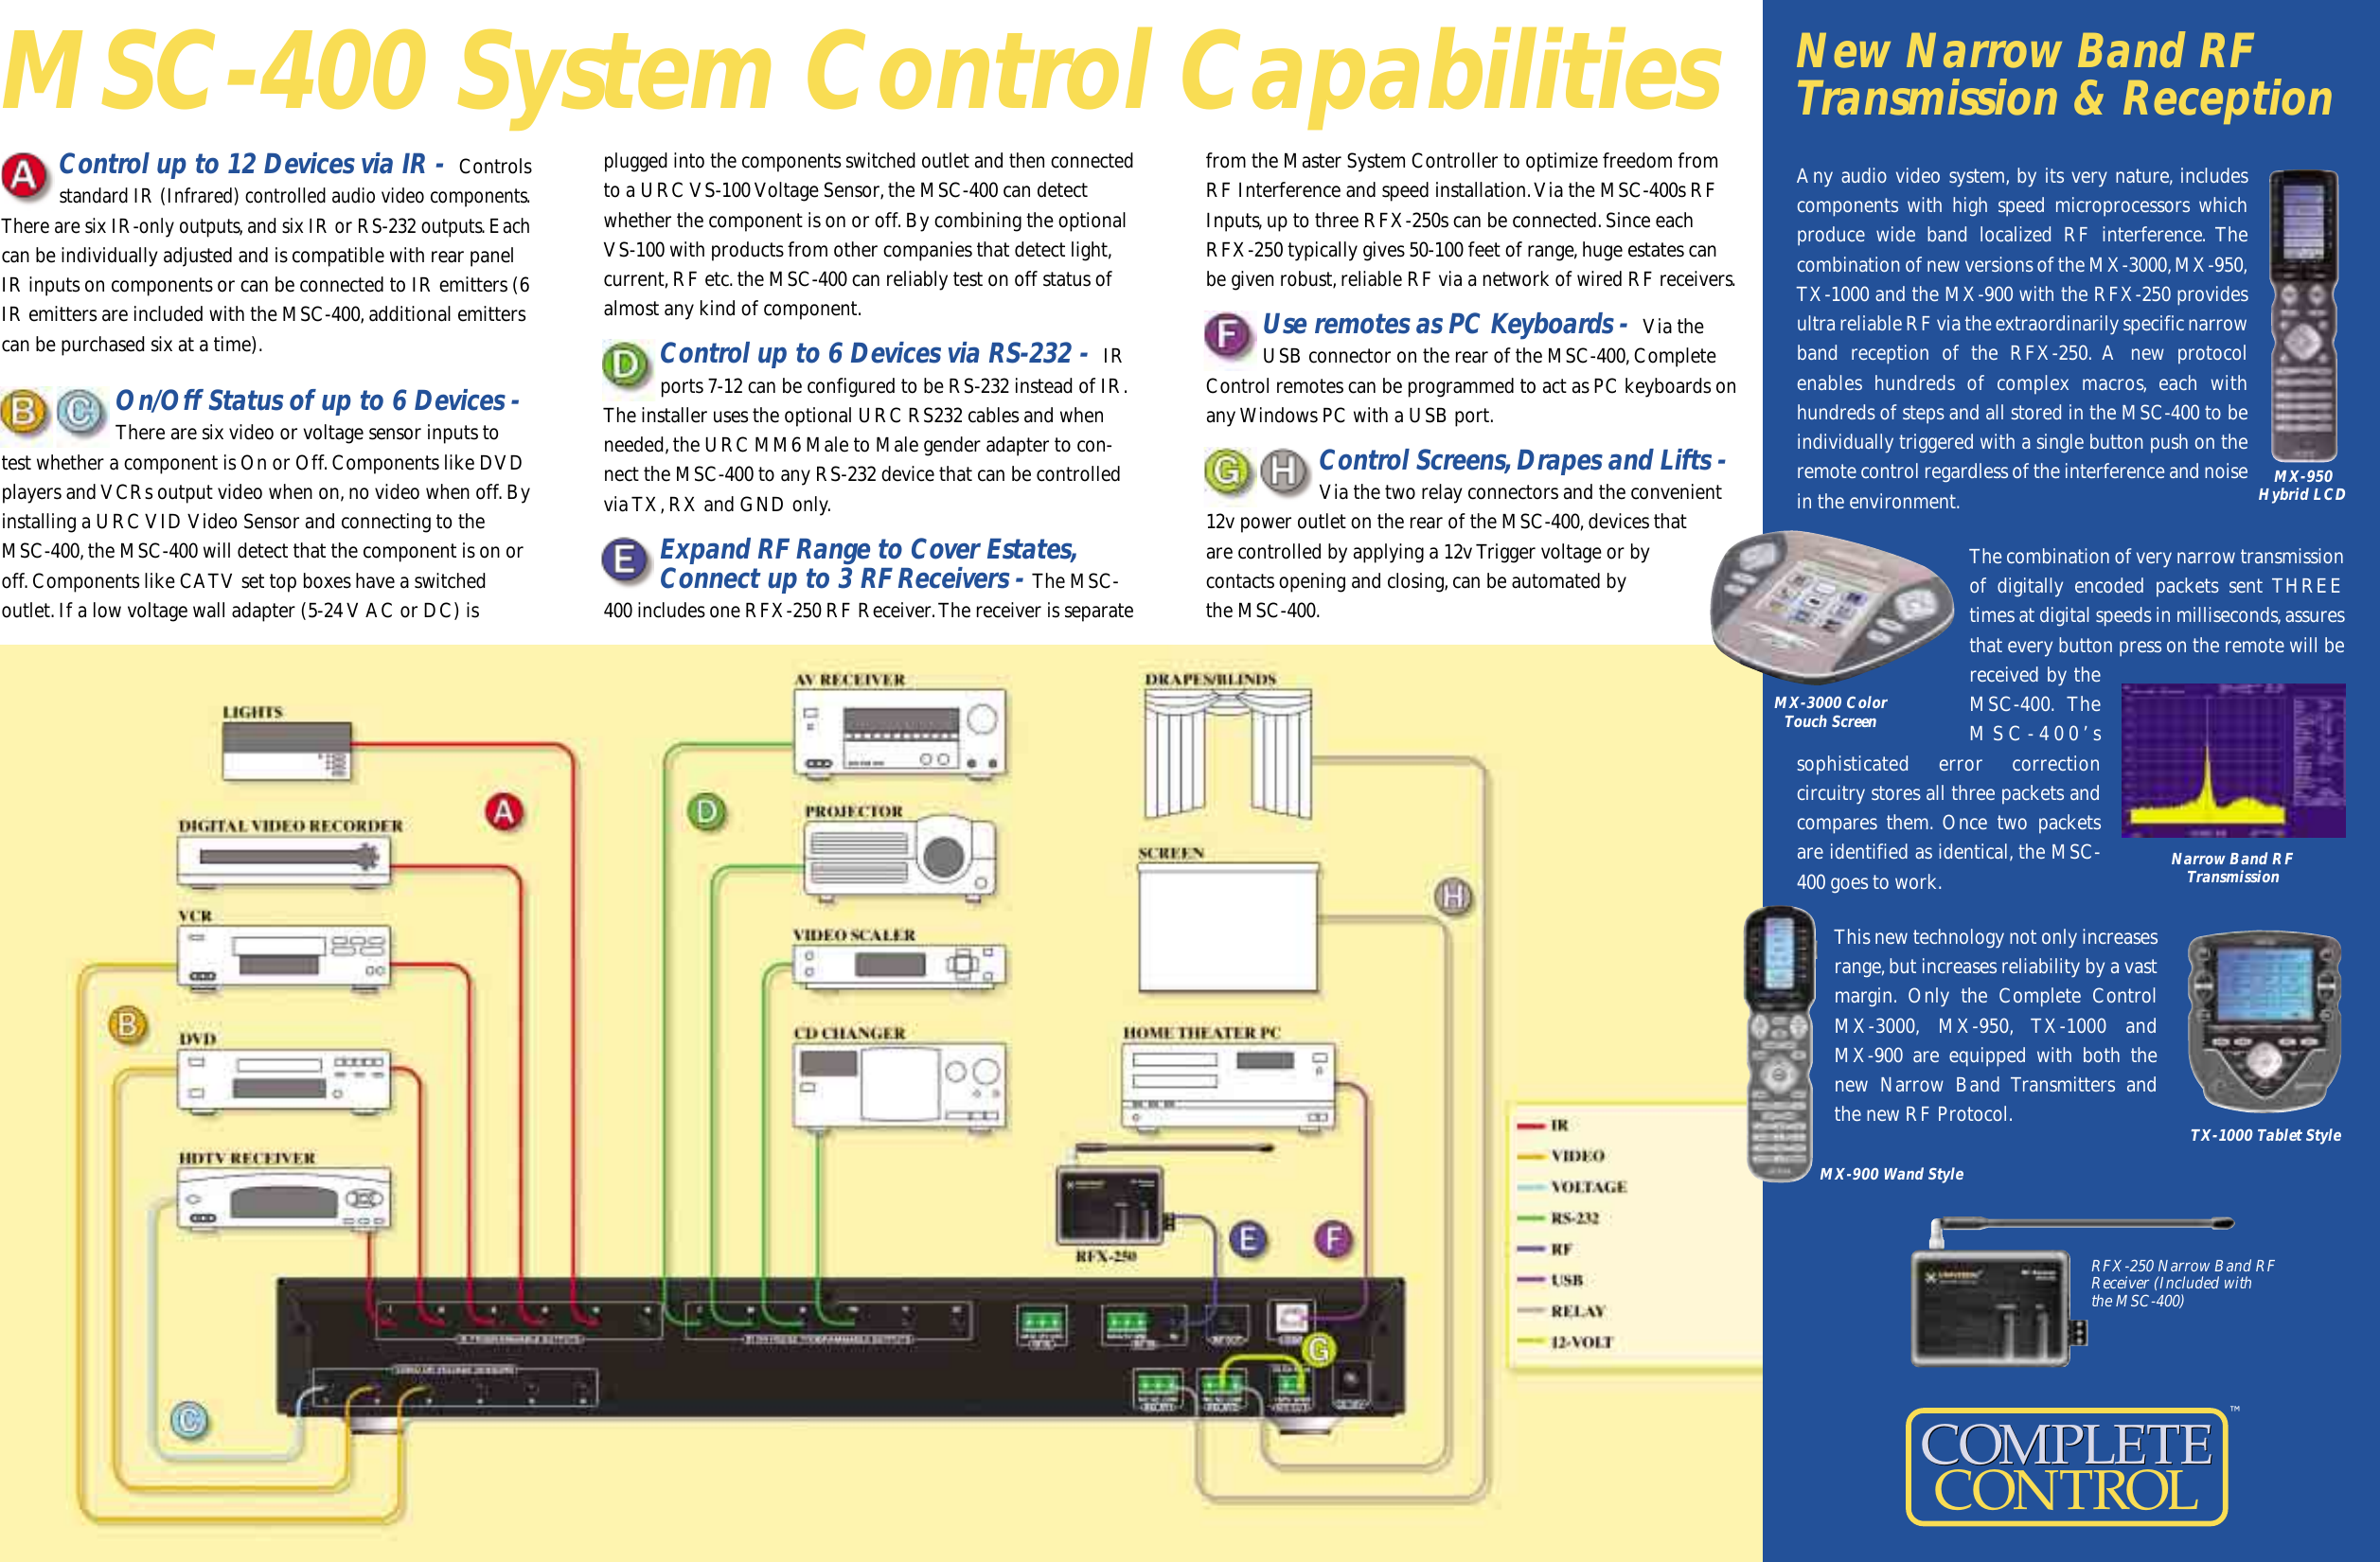 Control up to 12 Devices via IR - Controlsstandard IR (Infrared) controlled audio video components.There are six IR-only outputs, and six IR or RS-232 outputs. Eachcan be individually adjusted and is compatible with rear panelIR inputs on components or can be connected to IR emitters (6IR emitters are included with the MSC-400,additional emitterscan be purchased six at a time).On/Off Status of up to 6 Devices -There are six video or voltage sensor inputs totest whether a component is On or Off.Components like DVDplayers and VCRs output video when on,no video when off.Byinstalling a URC VID Video Sensor and connecting to theMSC-400,the MSC-400 will detect that the component is on oroff.Components like CATV set top boxes have a switched outlet.If a low voltage wall adapter (5-24 V AC or DC) isplugged into the components switched outlet and then connectedto a URC VS-100 Voltage Sensor, the MSC-400 can detectwhether the component is on or off.By combining the optionalVS-100 with products from other companies that detect light,current,RF etc.the MSC-400 can reliably test on off status ofalmost any kind of component.Control up to 6 Devices via RS-232 - IRports 7-12 can be configured to be RS-232 instead of IR.The installer uses the optional URC RS232 cables and whenneeded,the URC MM6 Male to Male gender adapter to con-nect the MSC-400 to any RS-232 device that can be controlledvia TX,RX and GND only.Expand RF Range to Cover Estates,Connect up to 3 RF Receivers - The MSC-400 includes one RFX-250 RF Receiver.The receiver is separatefrom the Master System Controller to optimize freedom fromRF Interference and speed installation.Via the MSC-400s RFInputs,up to three RFX-250s can be connected.Since eachRFX-250 typically gives 50-100 feet of range, huge estates canbe given robust,reliable RF via a network of wired RF receivers.Use remotes as PC Keyboards - Via theUSB connector on the rear of the MSC-400,CompleteControl remotes can be programmed to act as PC keyboards onany Windows PC with a USB port.Control Screens,Drapes and Lifts -Via the two relay connectors and the convenient12v power outlet on the rear of the MSC-400,devices thatare controlled by applying a 12v Trigger voltage or by contacts opening and closing,can be automated by the MSC-400.New Narrow Band RFTransmission &amp; ReceptionAny audio video system, by its very nature, includescomponents with high speed microprocessors whichproduce wide band localized RF interference. The combination of new versions of the MX-3000,MX-950,TX-1000 and the MX-900 with the RFX-250 providesultra reliable RF via the extraordinarily specific narrowband reception of the RFX-250. A new protocolenables hundreds of complex macros, each with hundreds of steps and all stored in the MSC-400 to beindividually triggered with a single button push on theremote control regardless of the interference and noisein the environment.The combination of very narrow transmissionof digitally encoded packets sent THREEtimes at digital speeds in milliseconds,assuresthat every button press on the remote will bereceived by theMSC-400. TheMSC-400’ssophisticated error correction circuitry stores all three packets andcompares them. Once two packetsare identified as identical, the MSC-400 goes to work.This new technology not only increasesrange,but increases reliability by a vastmargin. Only the Complete ControlMX-3000, MX-950, TX-1000 and MX-900 are equipped with both thenew Narrow Band Transmitters and the new RF Protocol.MX-3000 ColorTouch ScreenNarrow Band RFTransmissionTX-1000 Tablet StyleRFX-250 Narrow Band RFReceiver (Included withthe MSC-400)MX-950Hybrid LCDMX-900 Wand StyleCOMPLETE ™CONTROLCOMPLETEMSC-400 System Control Capabilities